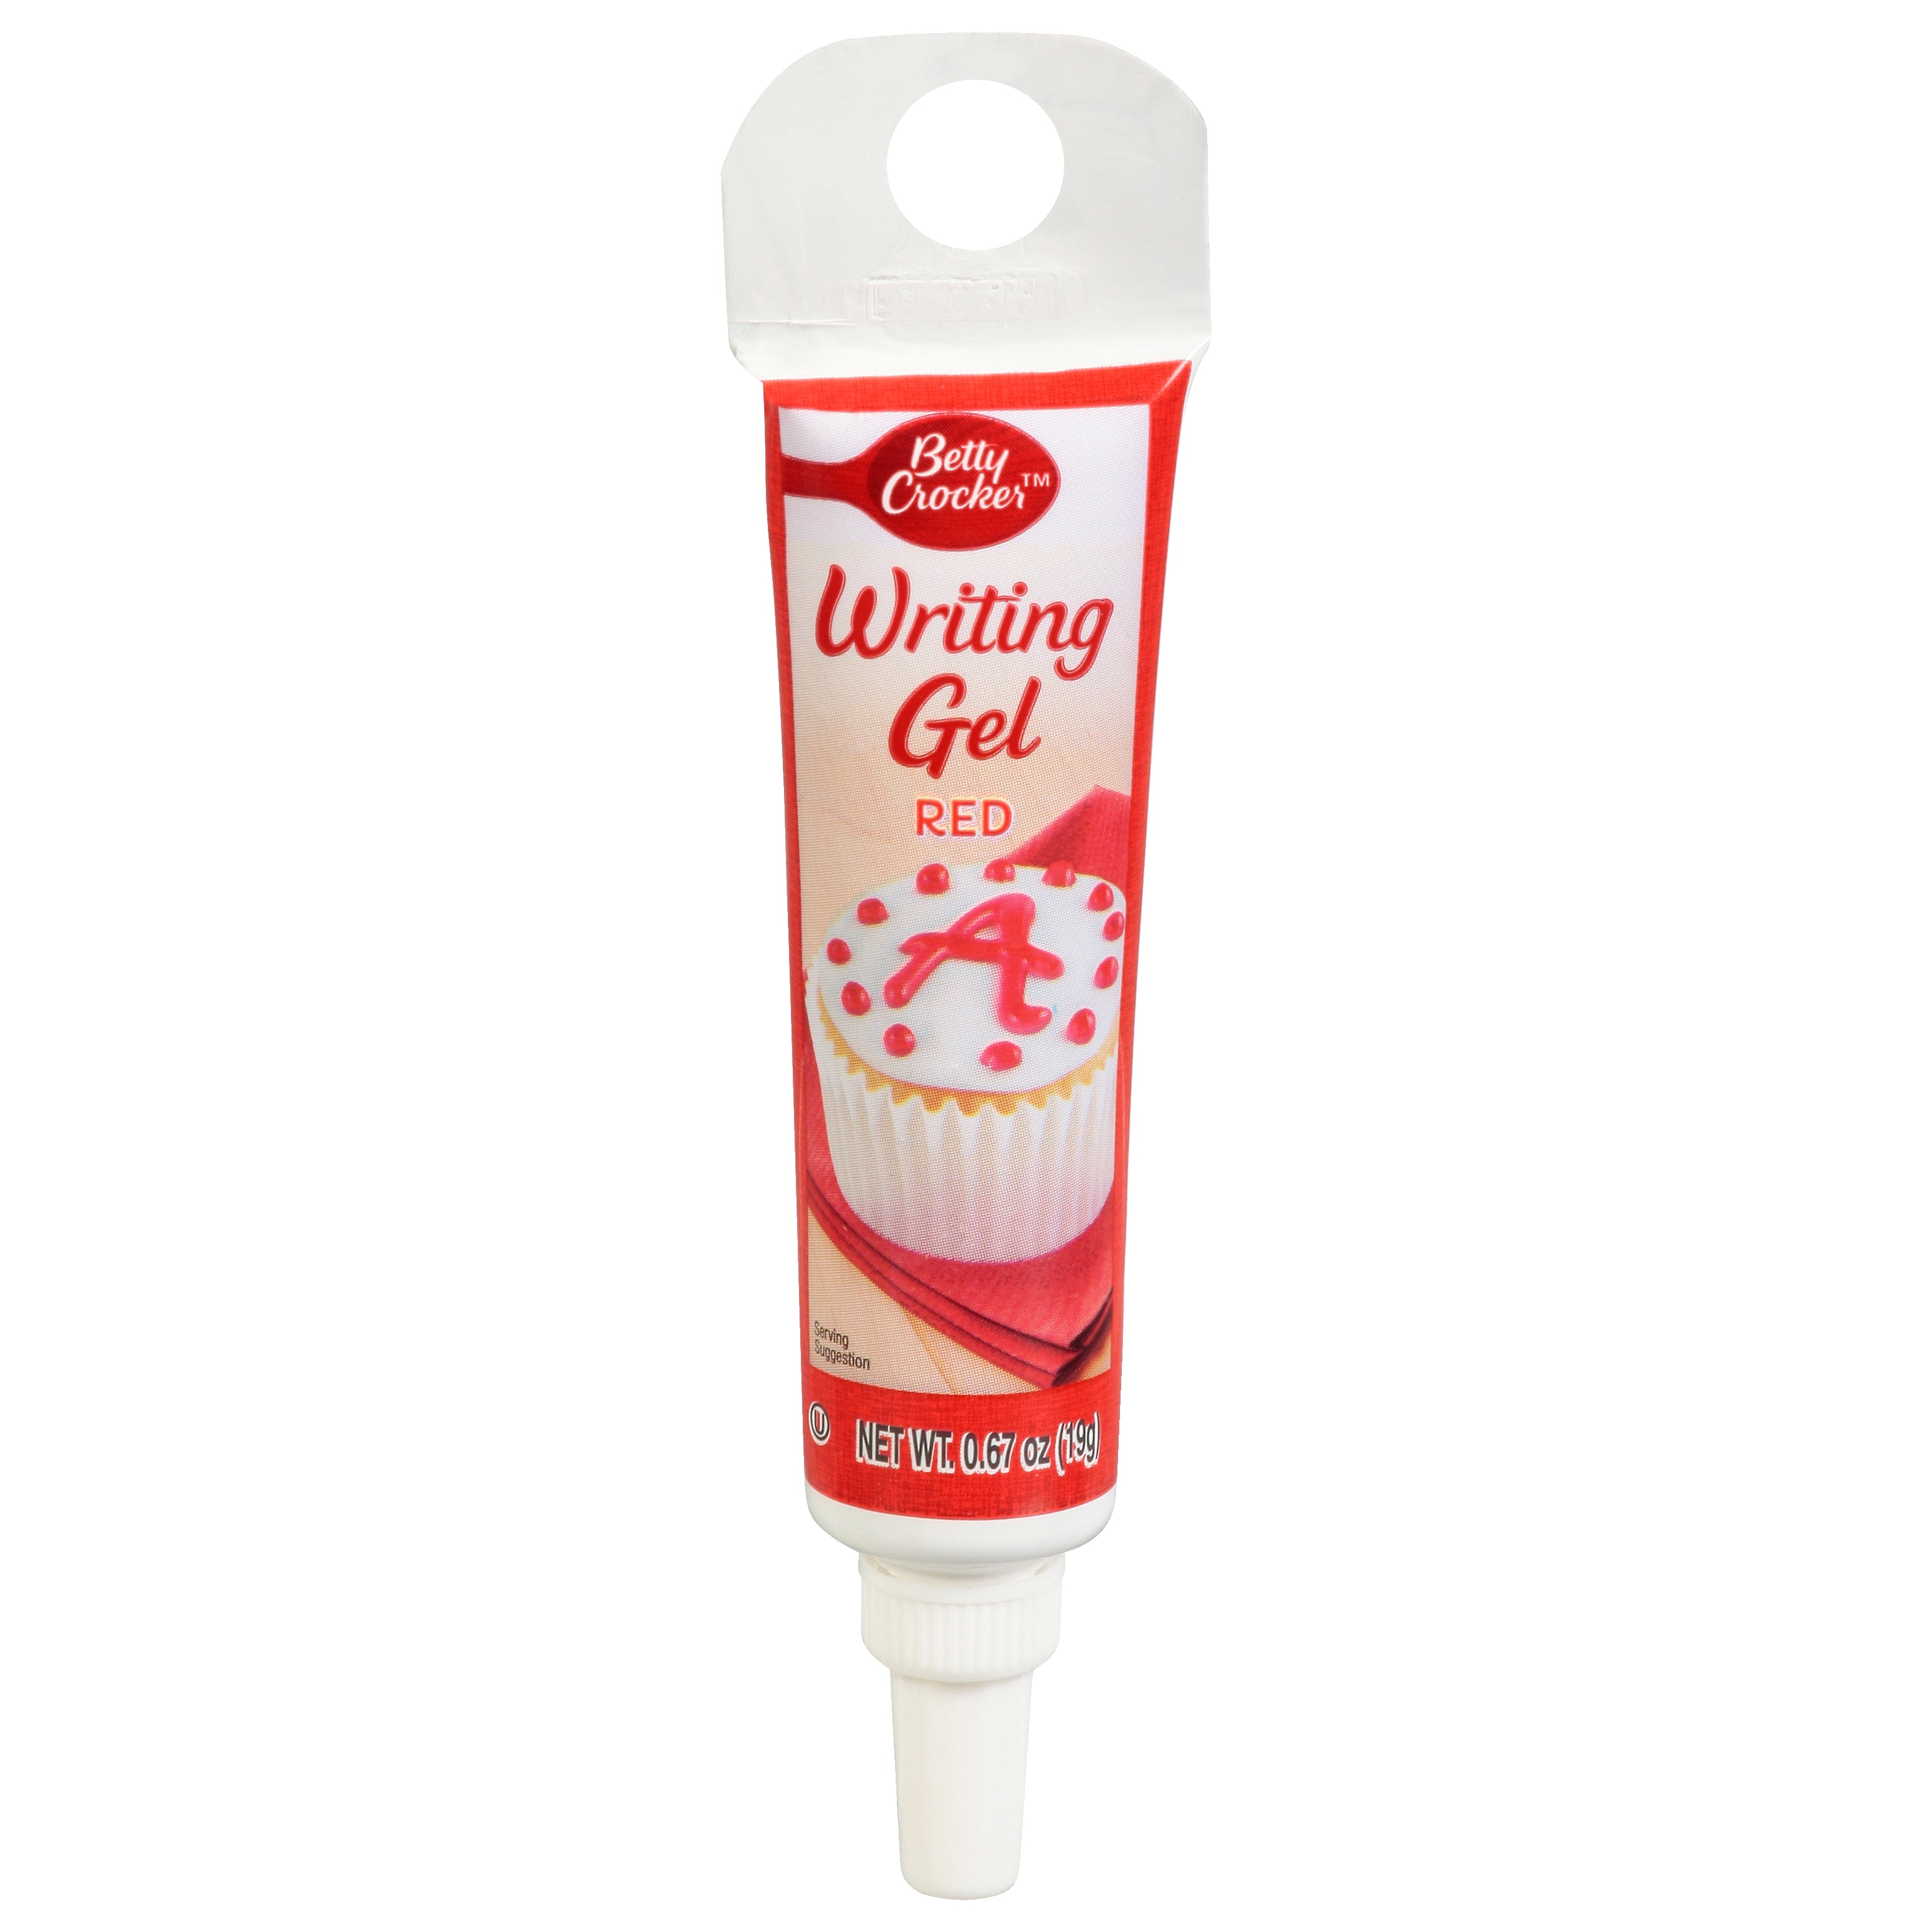 Betty Crocker Dessert Decorating Writing Gel Icing, Red, 1 Count, 0.67 Ounces